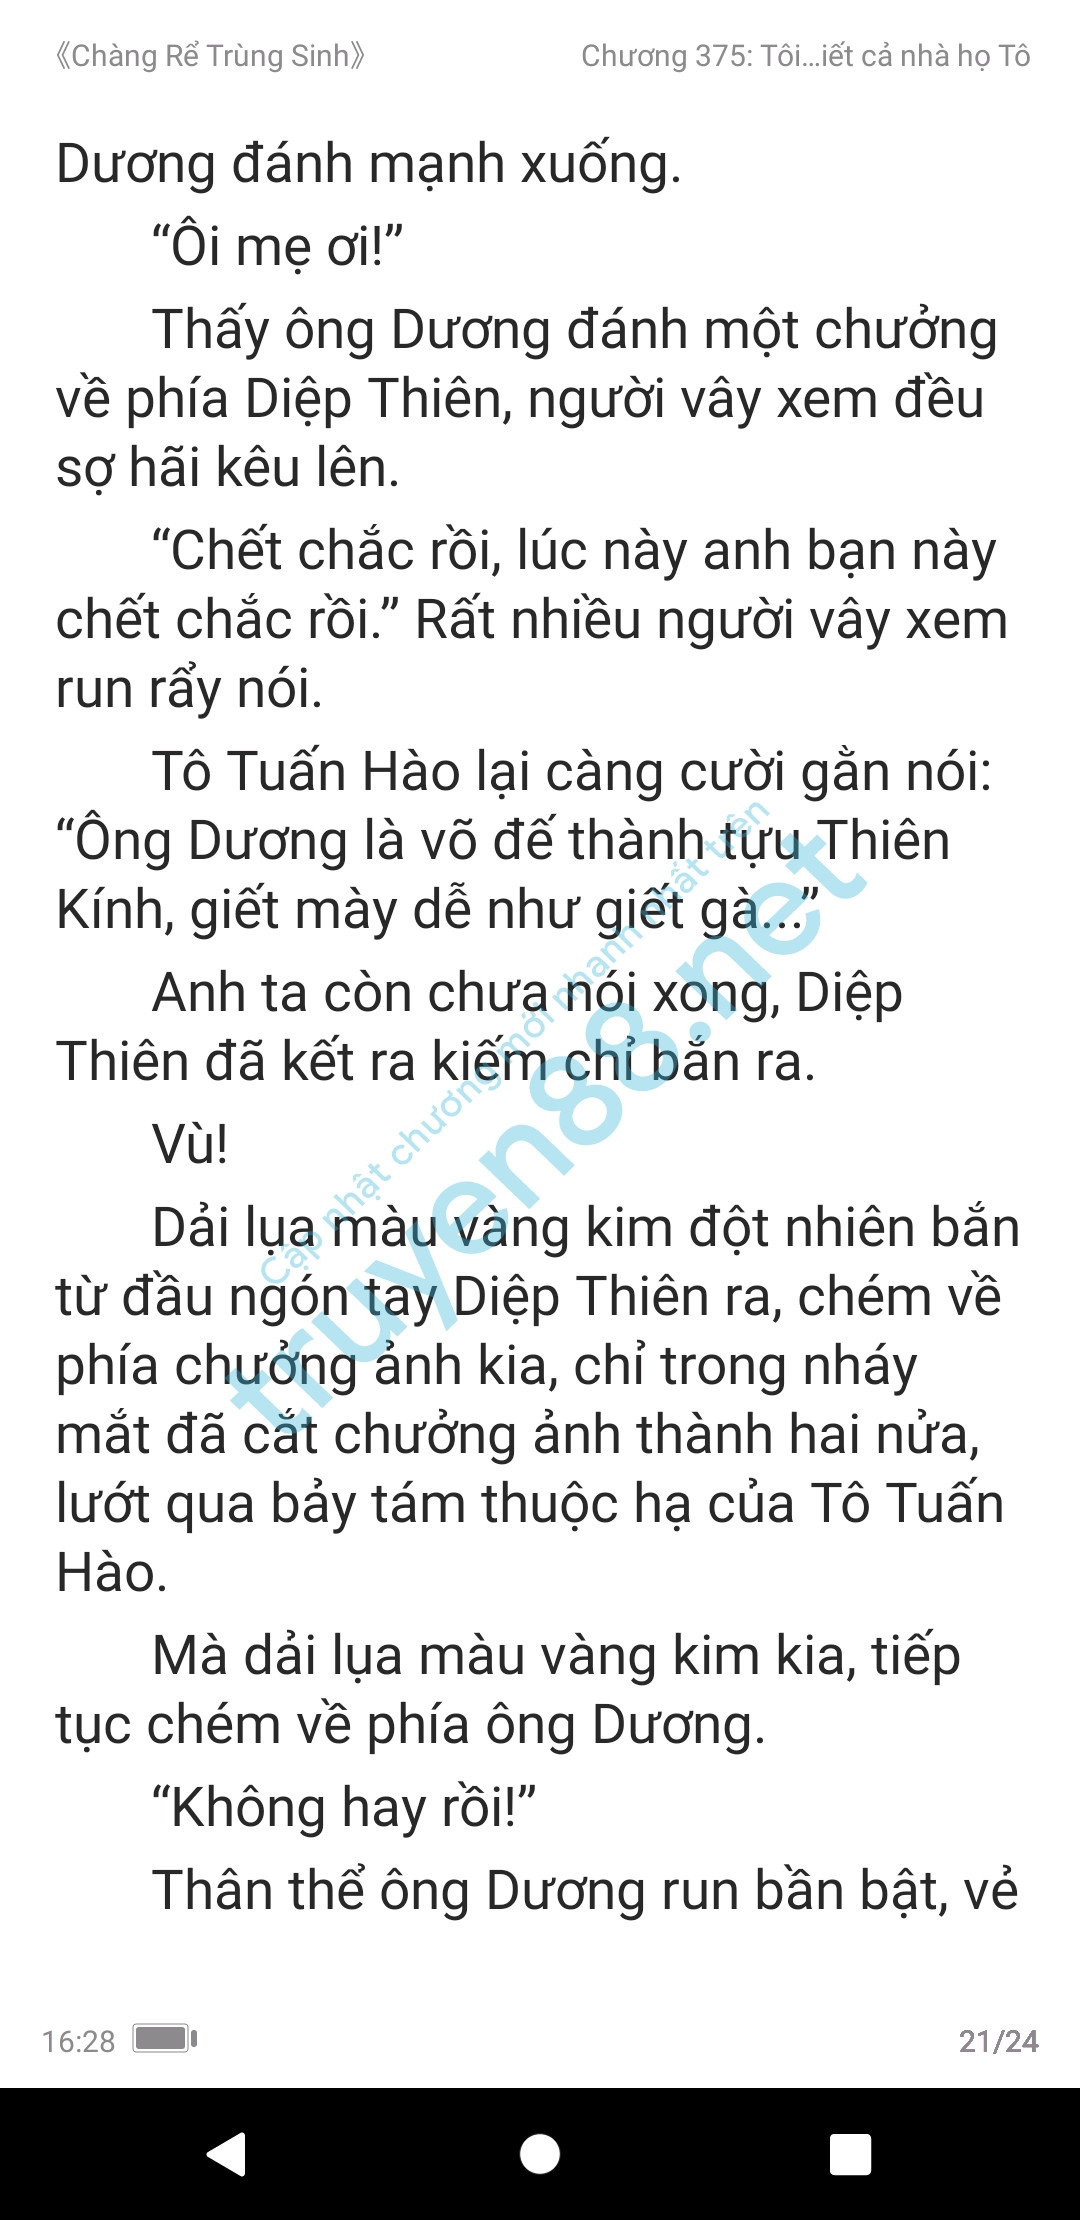 chang-re-trung-sinh-375-0